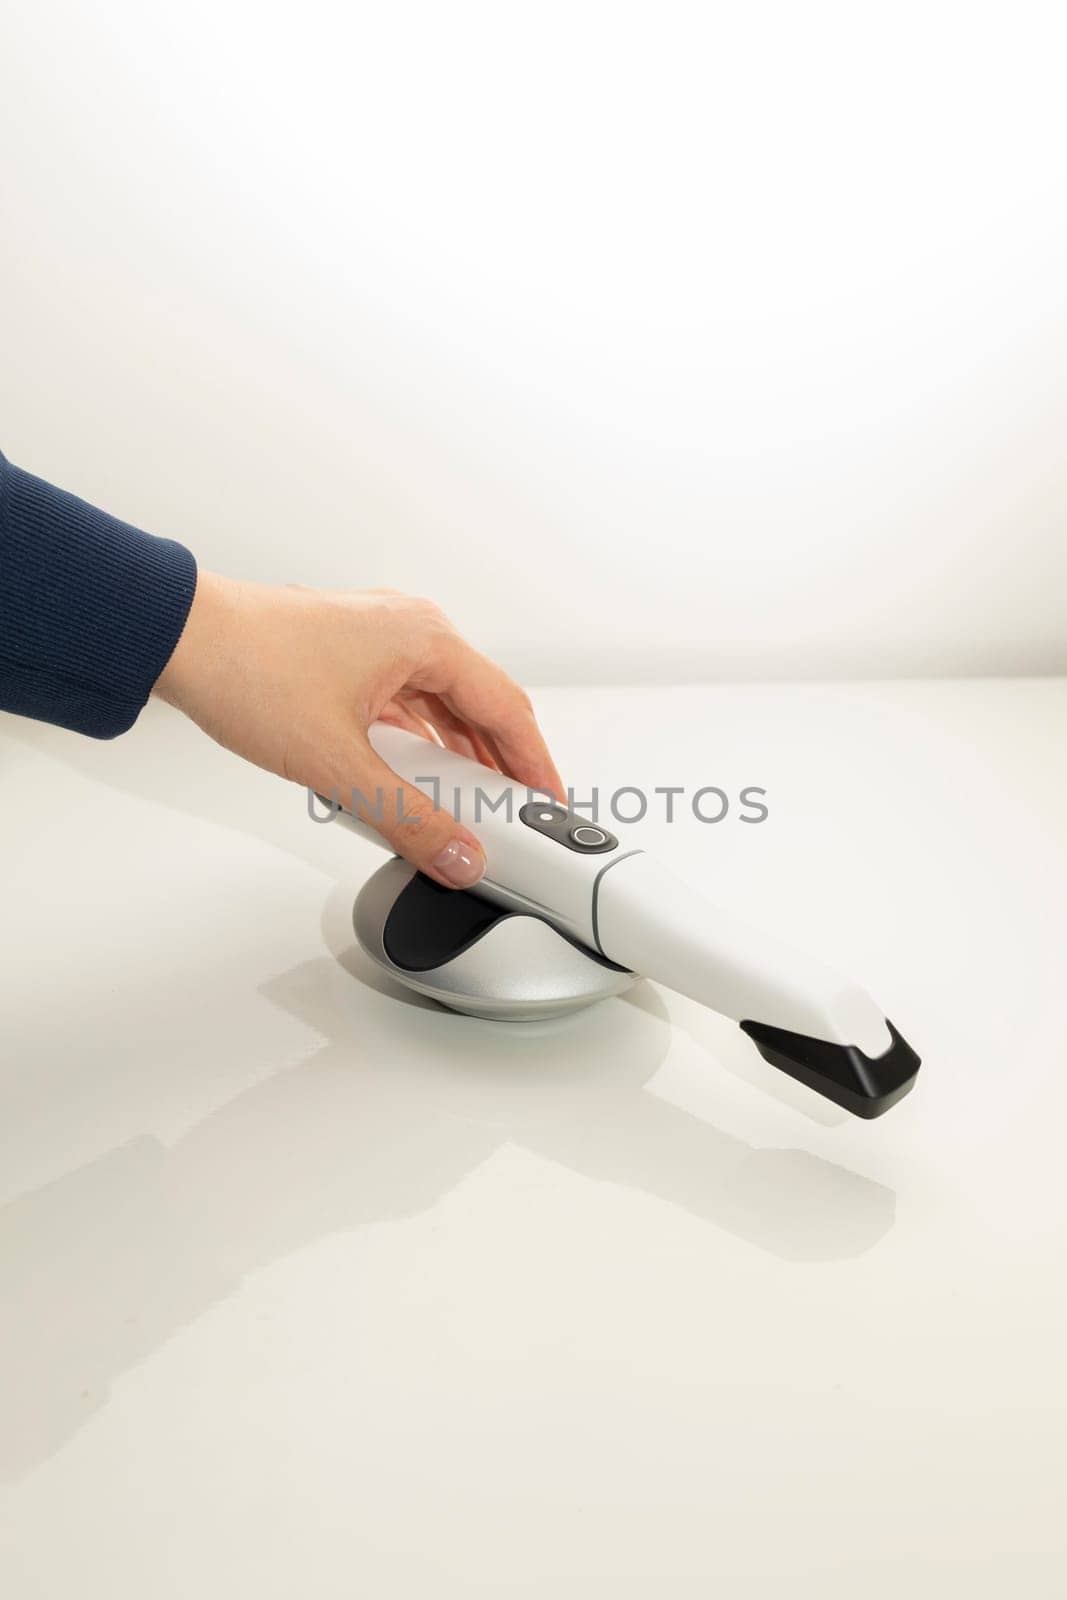 Doctor's Hand Holds 3D Intraoral Teeth Scanner For Imaging Tooth. Vertical Plane. Lab, Dental Equipment, Device, Dentistry. Copy Space. High quality photo